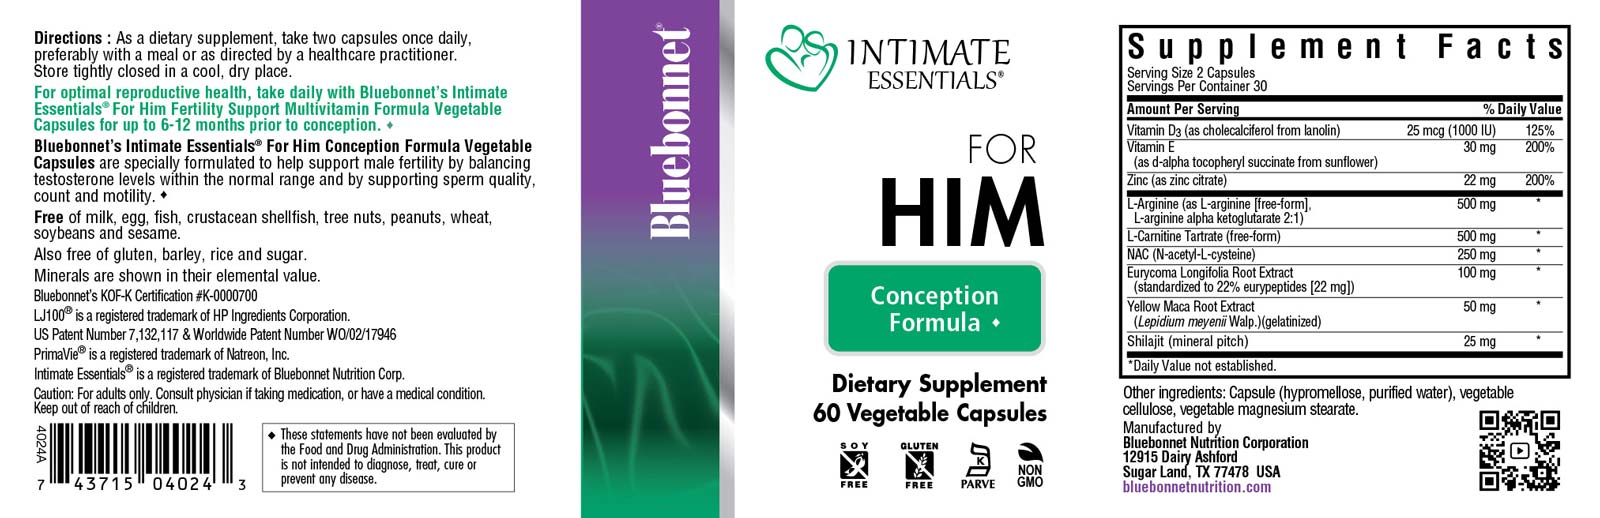 INTIMATE ESSENTIALS® CONCEPTION FORMULA FOR HIM vegetable capsules May Support Testosterone levels & Healthy Sperm #size_60 count